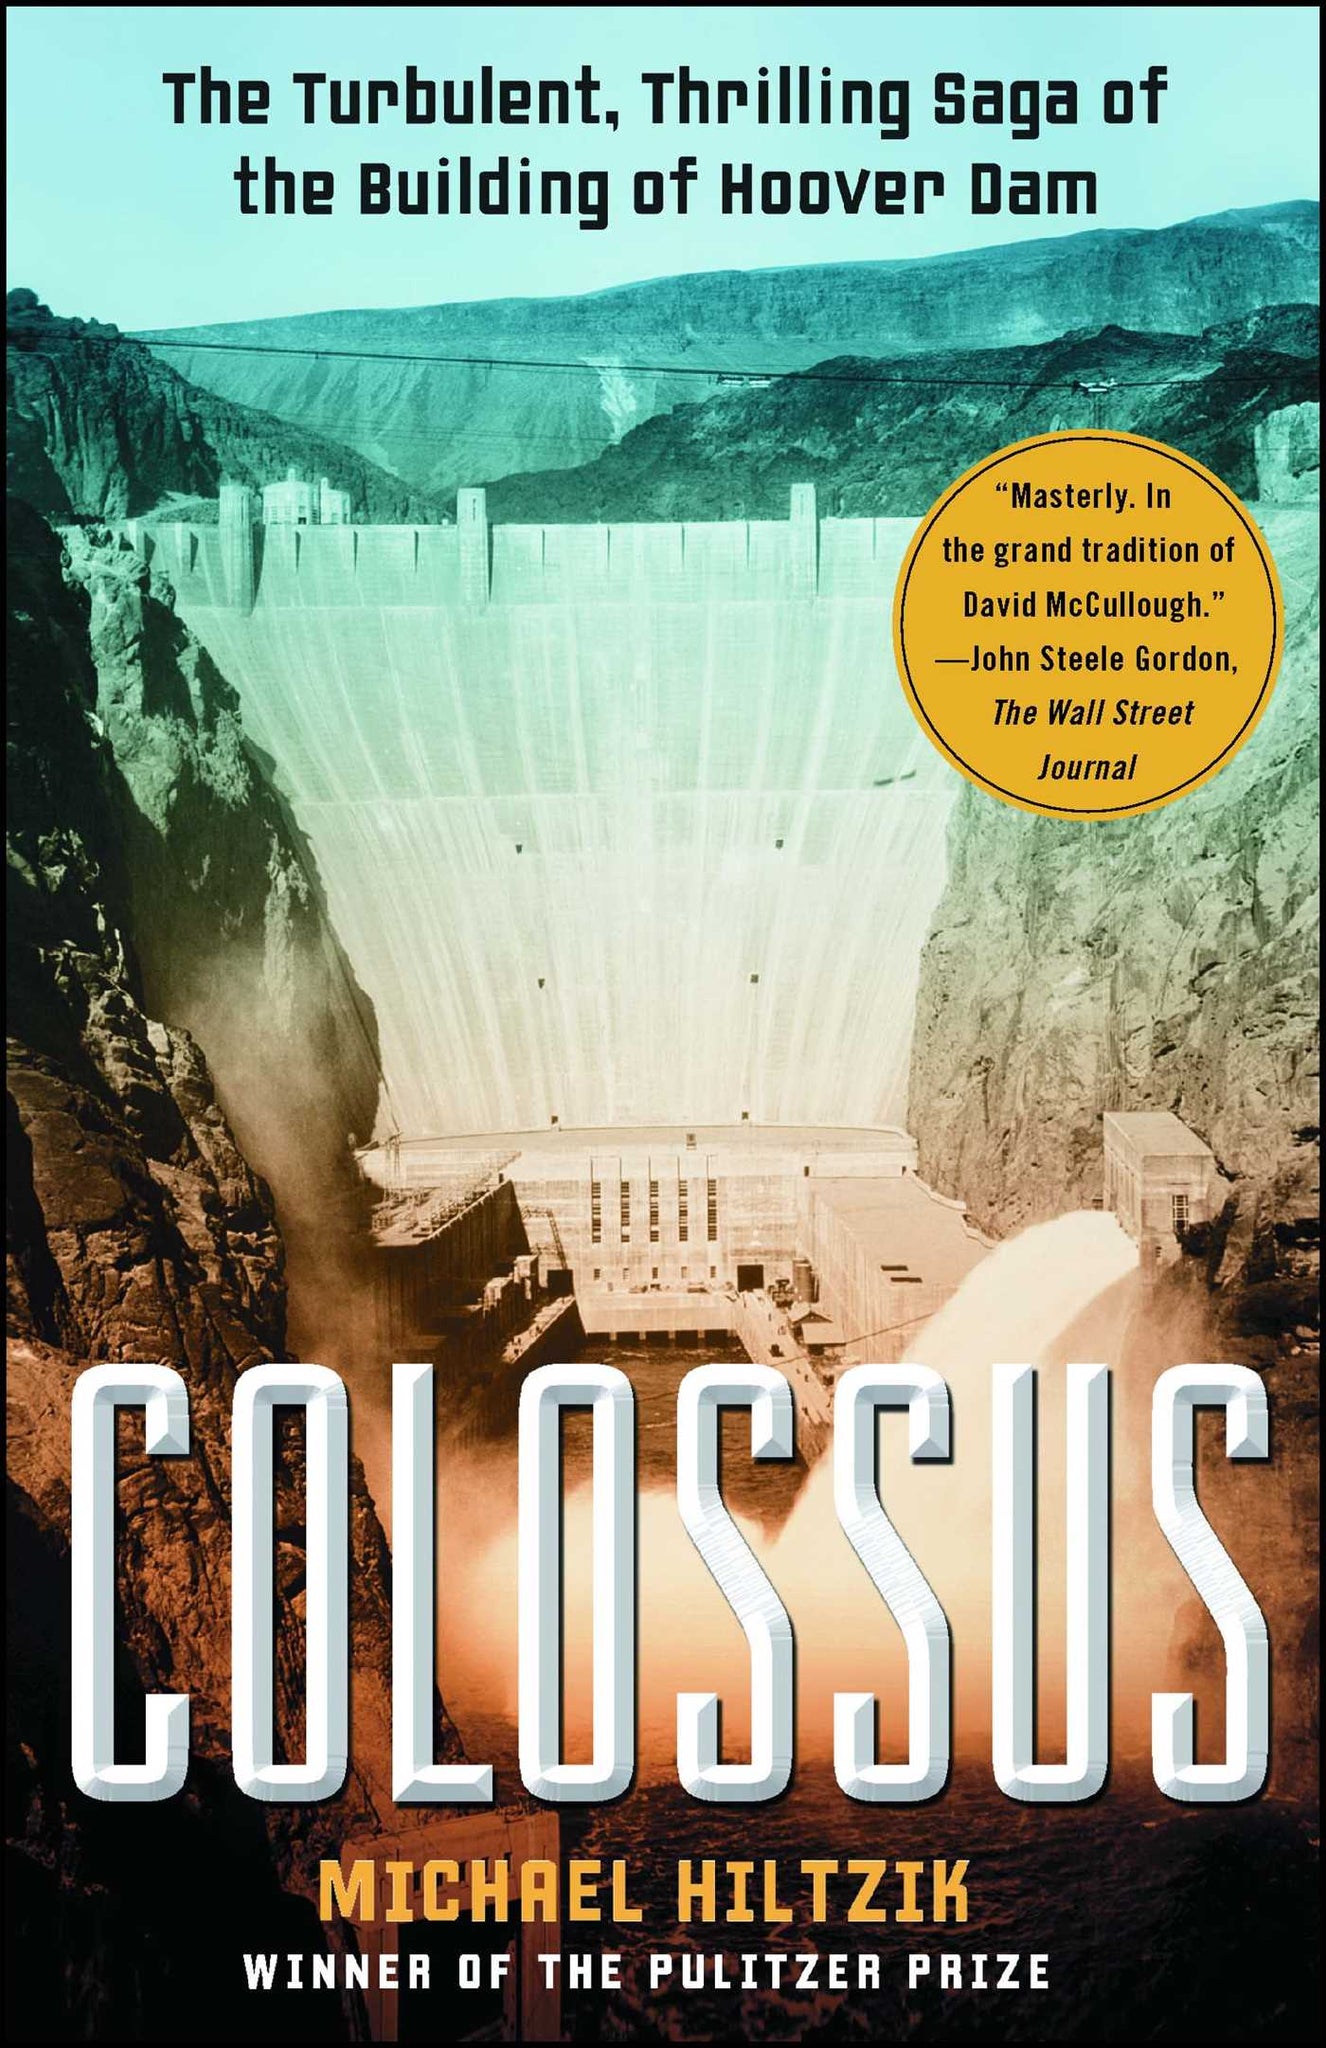 Colossus : The Turbulent, Thrilling Saga of the Building of Hoover Dam